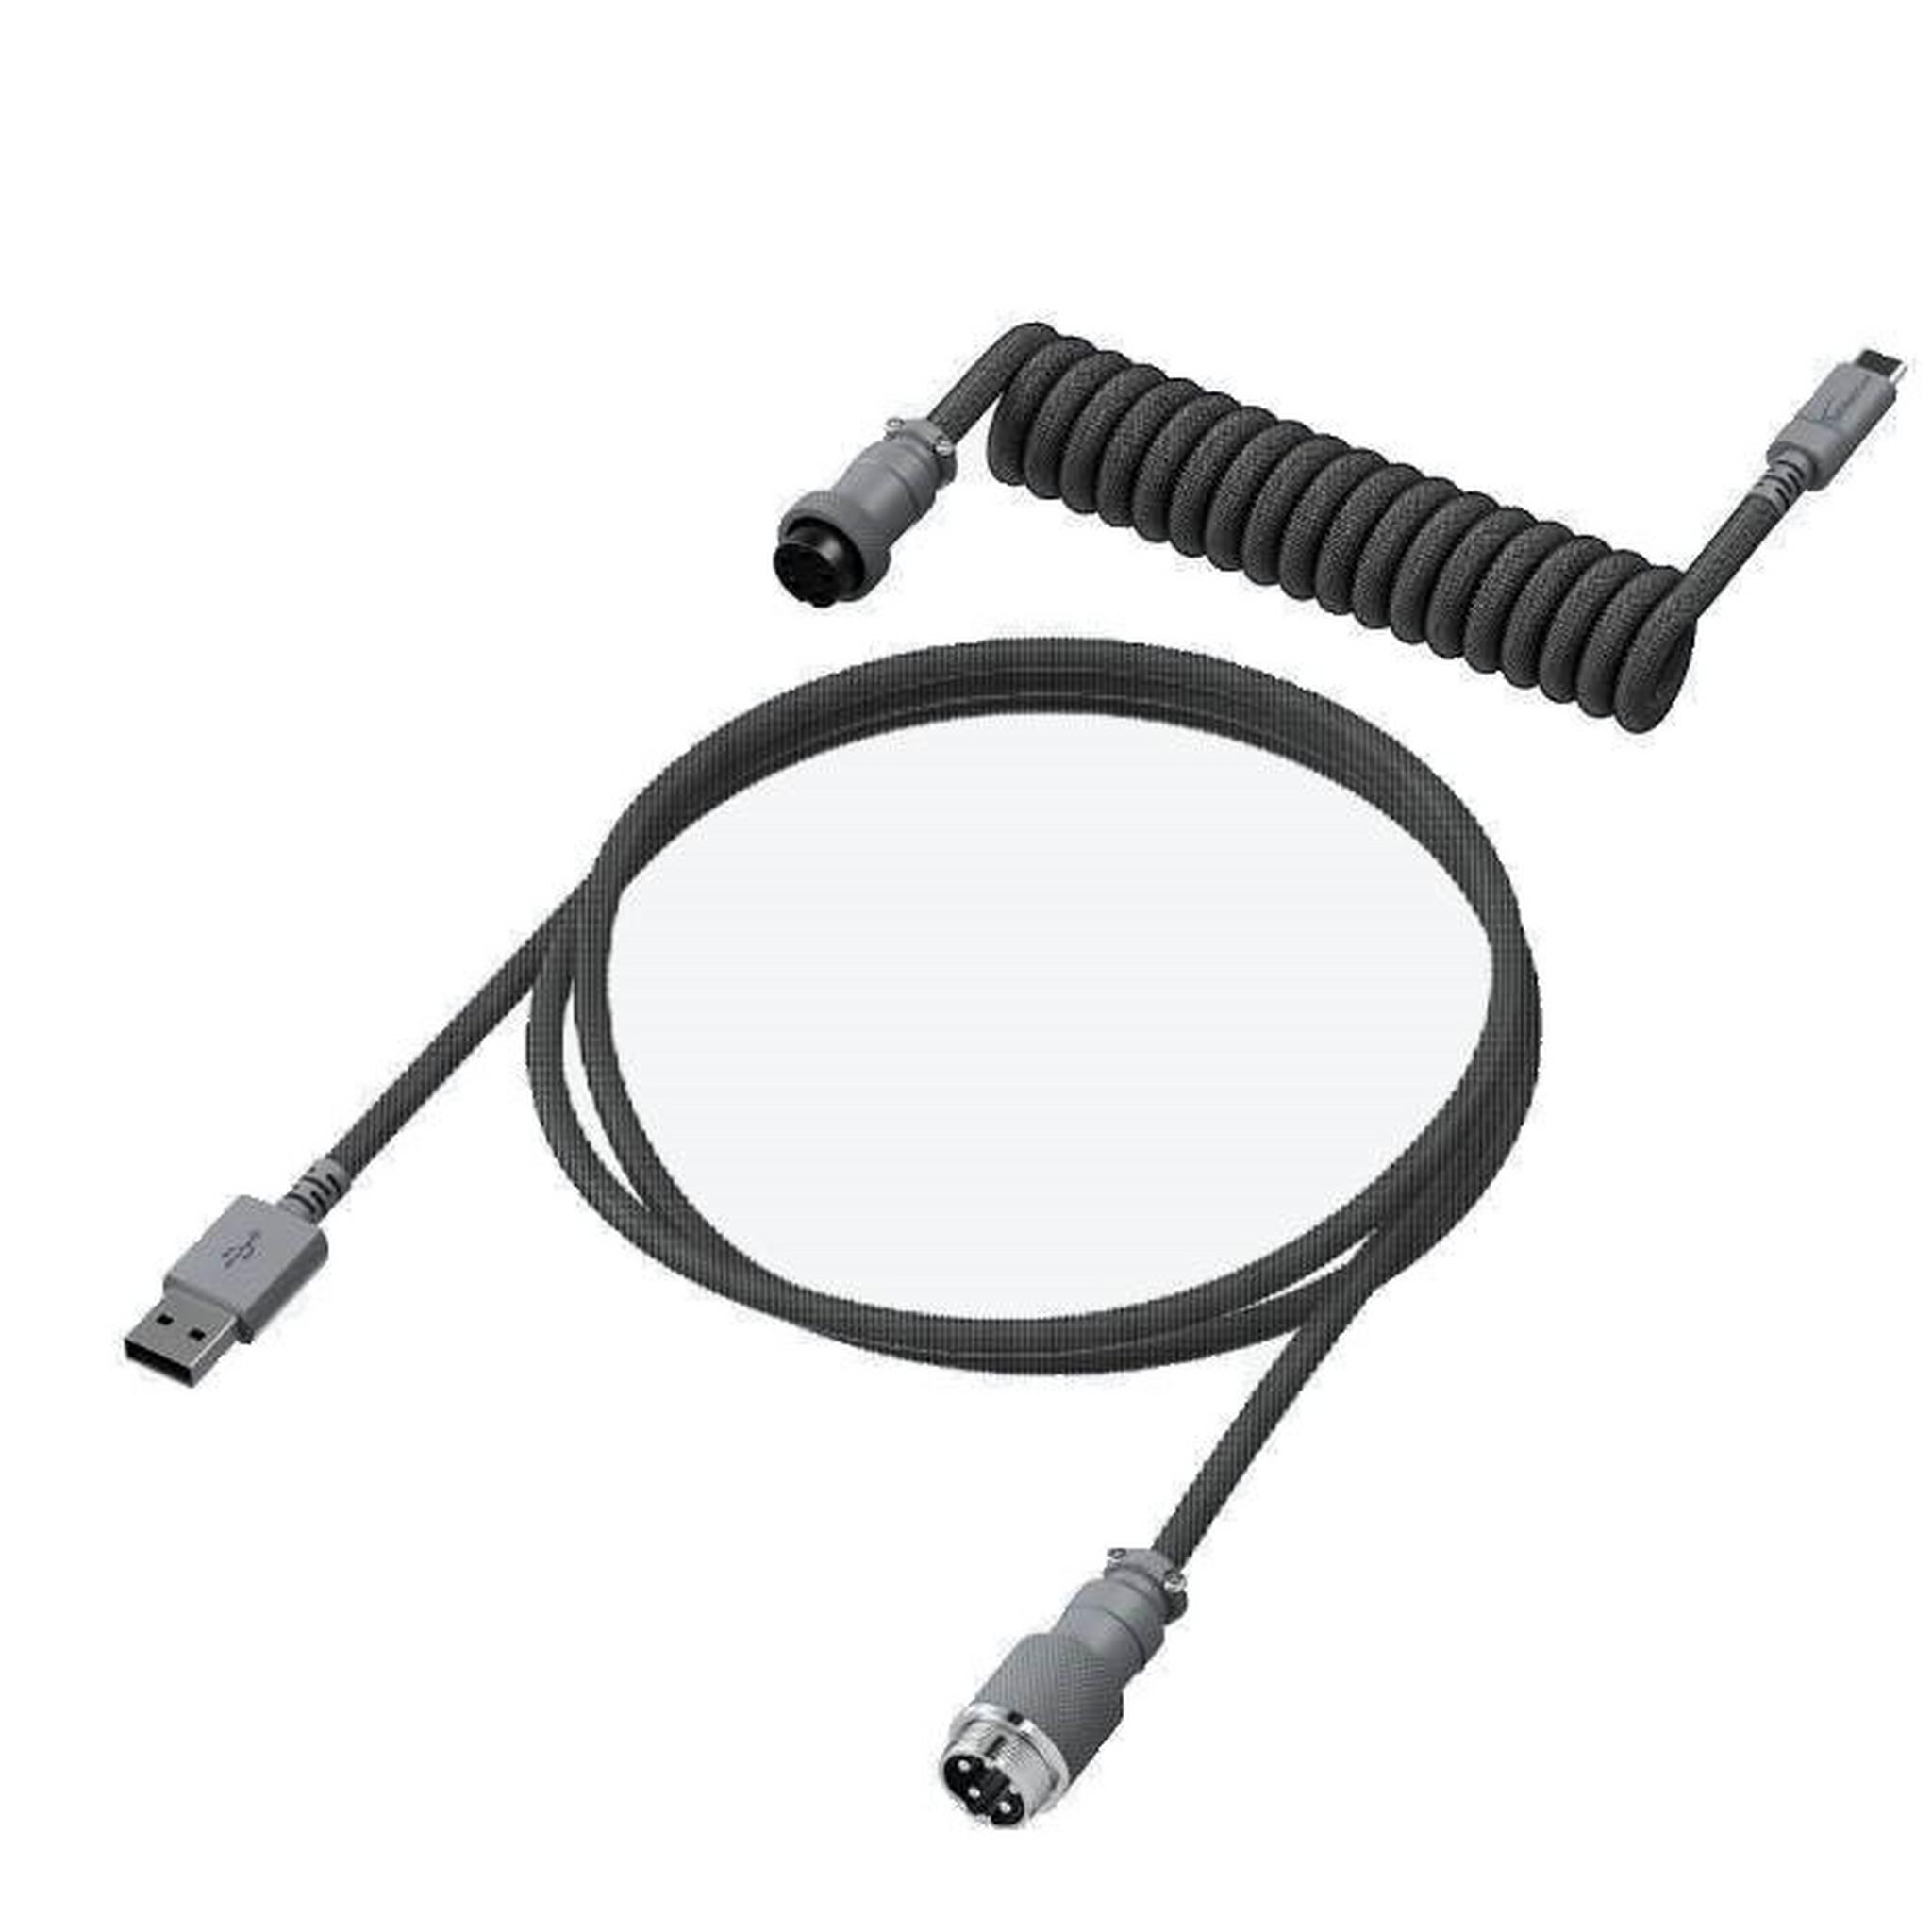 HyperX USB-C Coiled 1.37m Cable – Gray